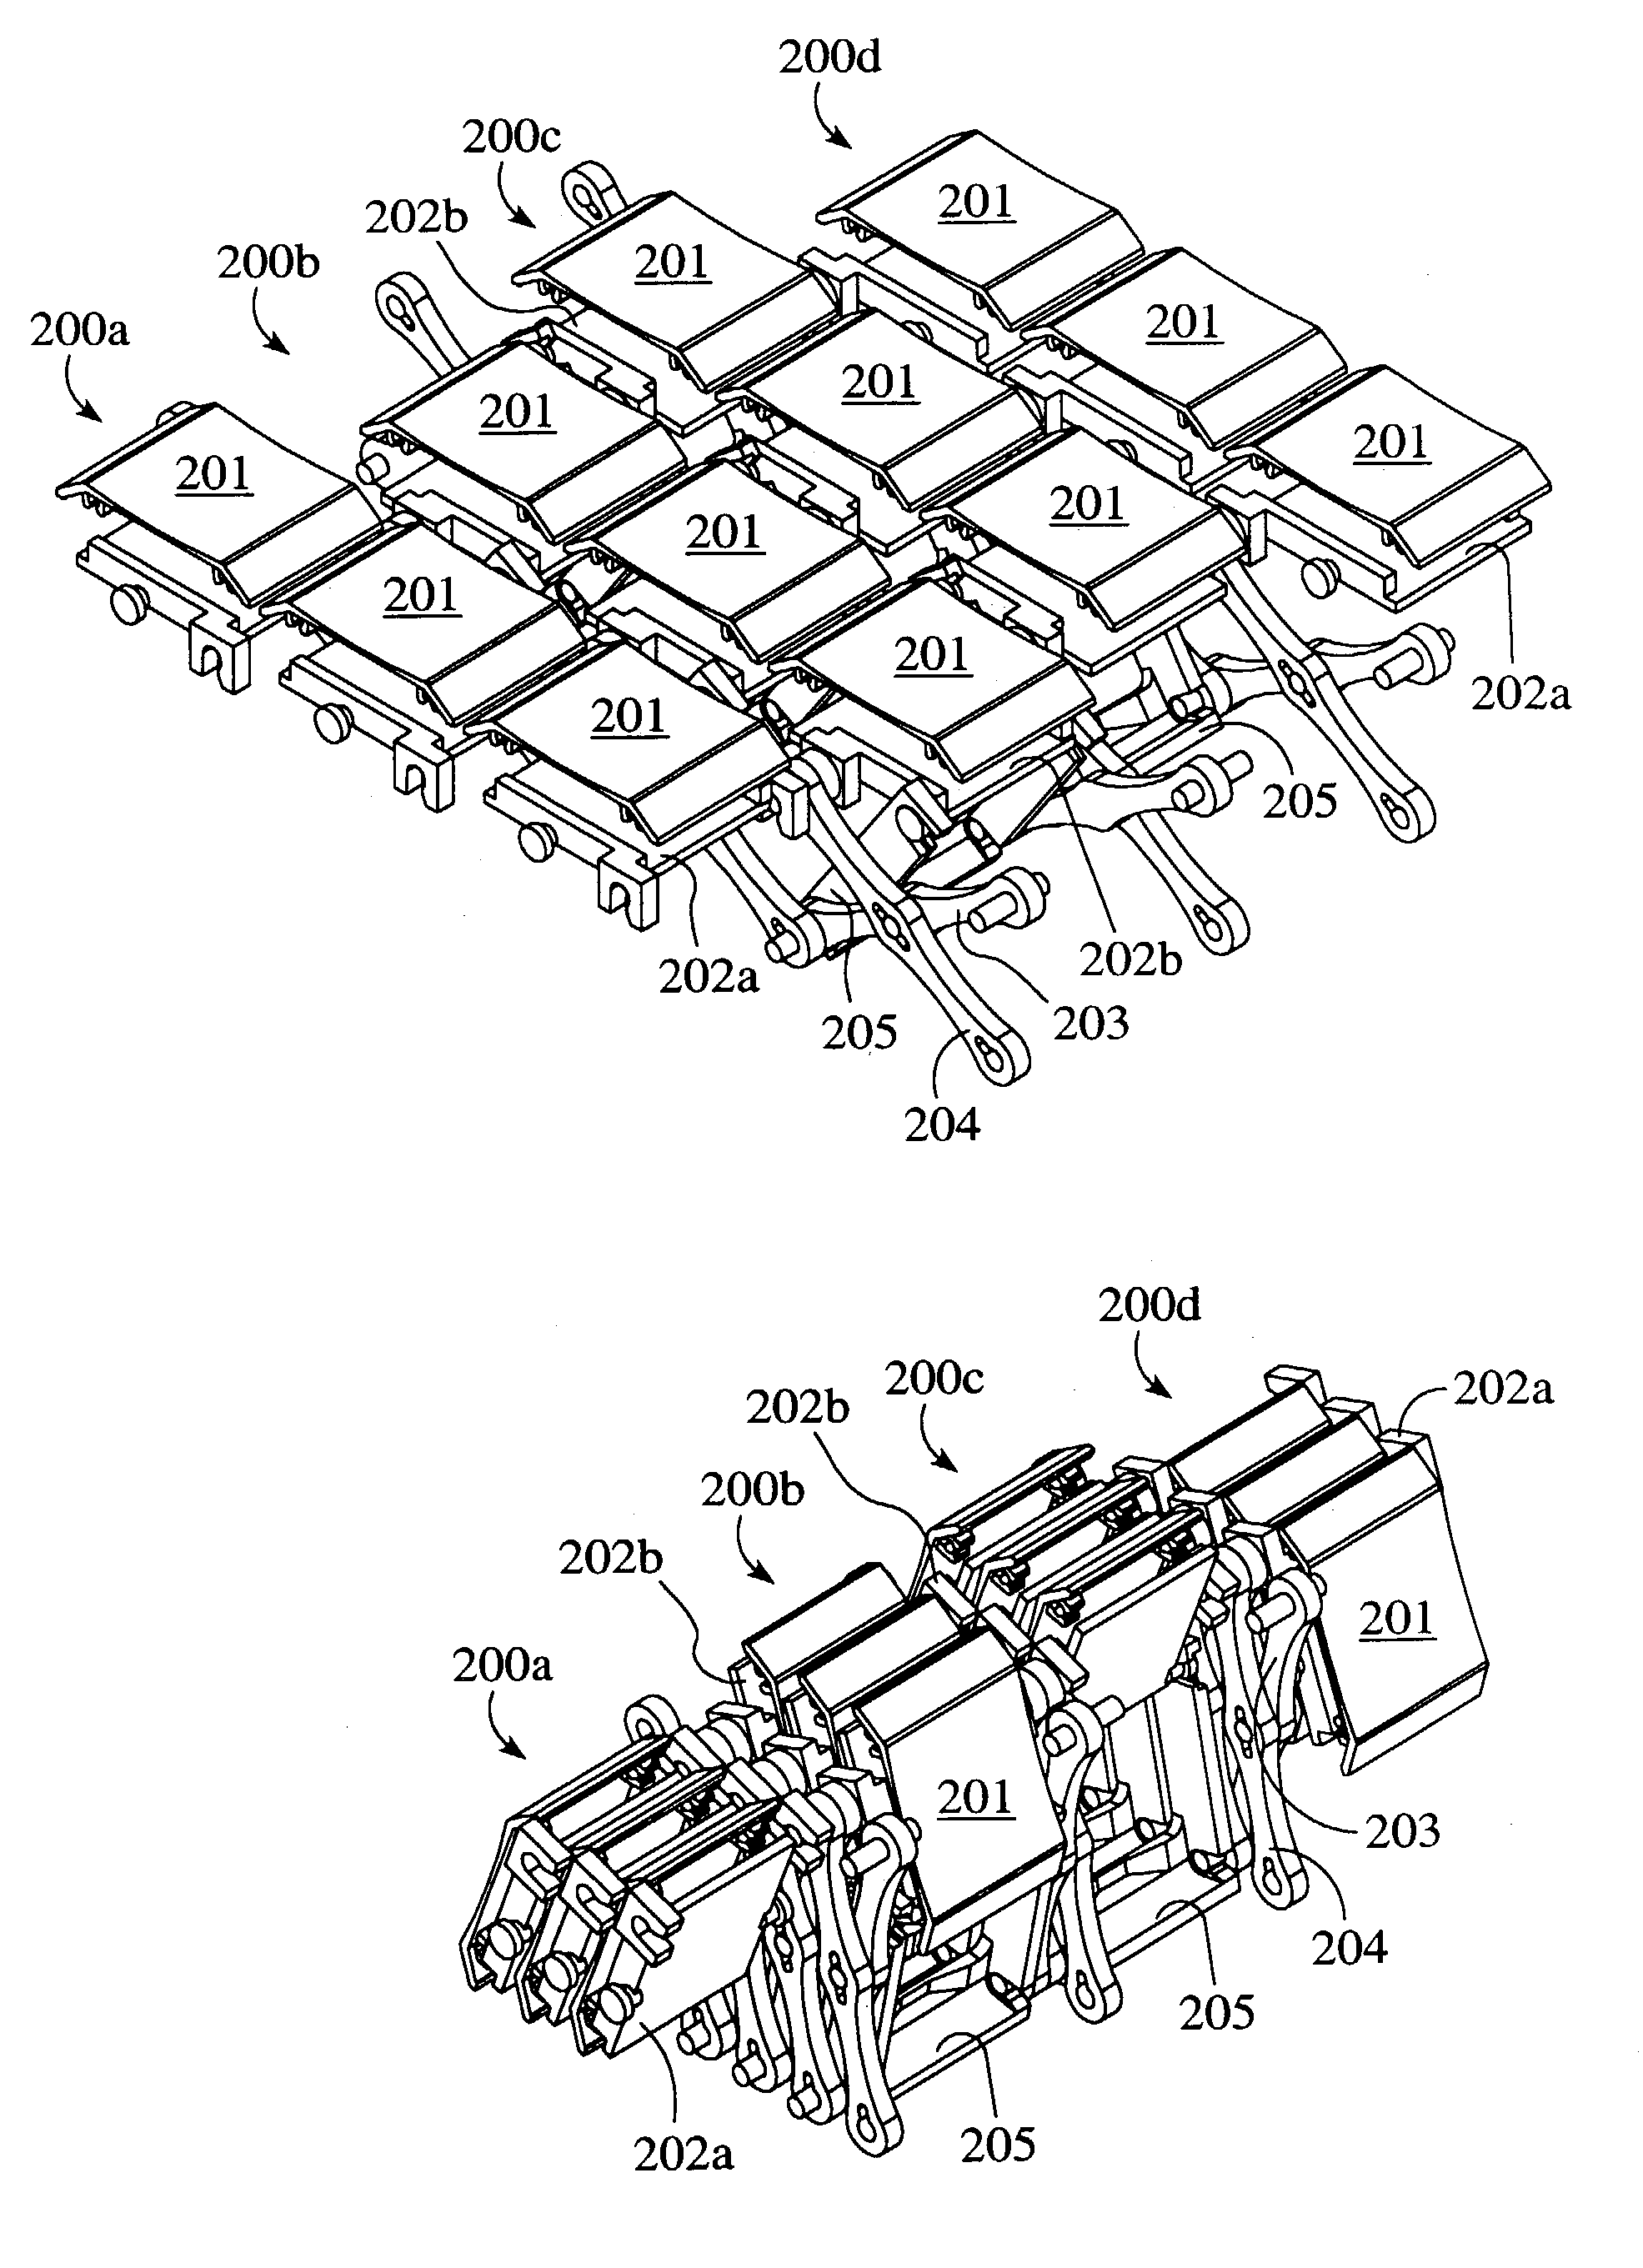 System and method for detecting key actuation in a keyboard